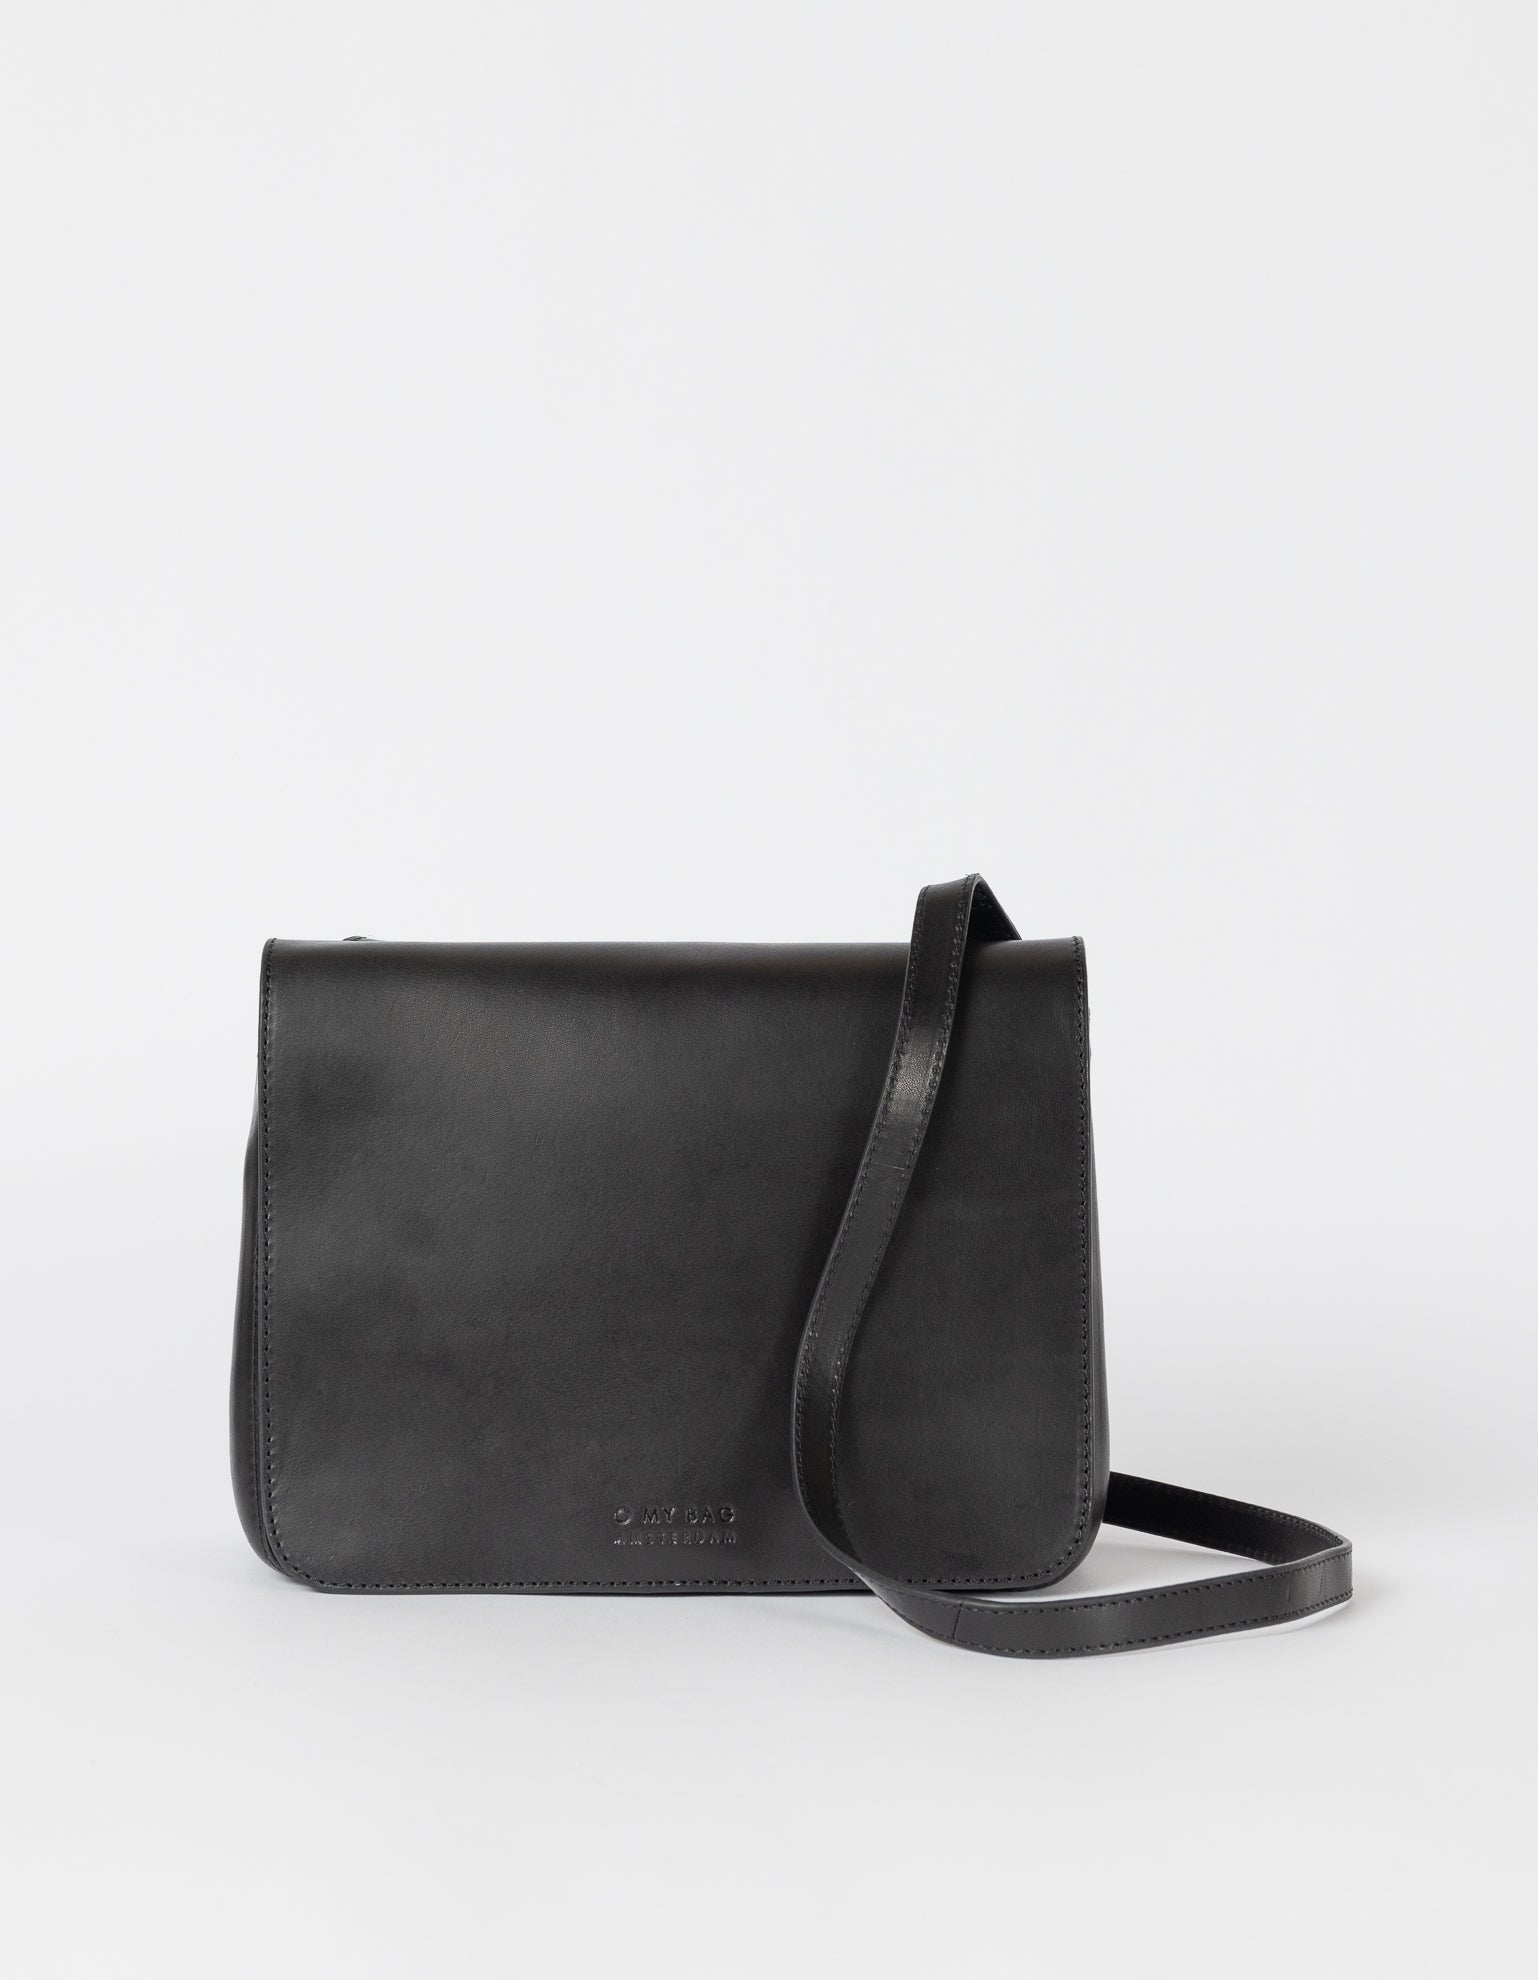 Lucy in black classic leather. Crossbody handbag. Front product image.